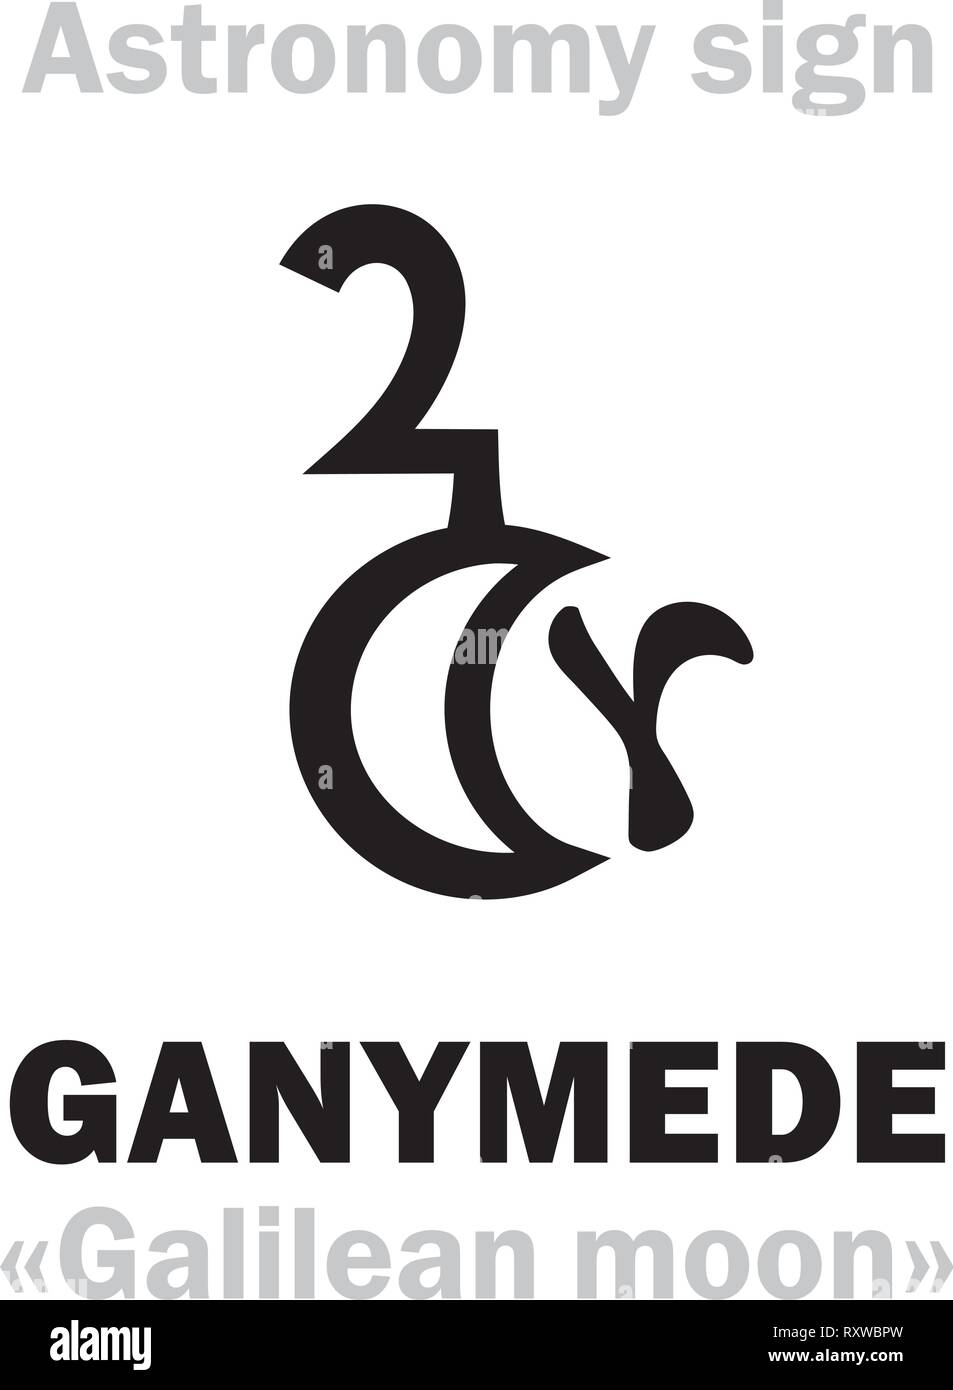 Astrology Alphabet: GANYMEDE («Galilean moon III»), one of the four large satellites of Jupiter. Hieroglyphic character sign (astronomical symbol). Stock Vector